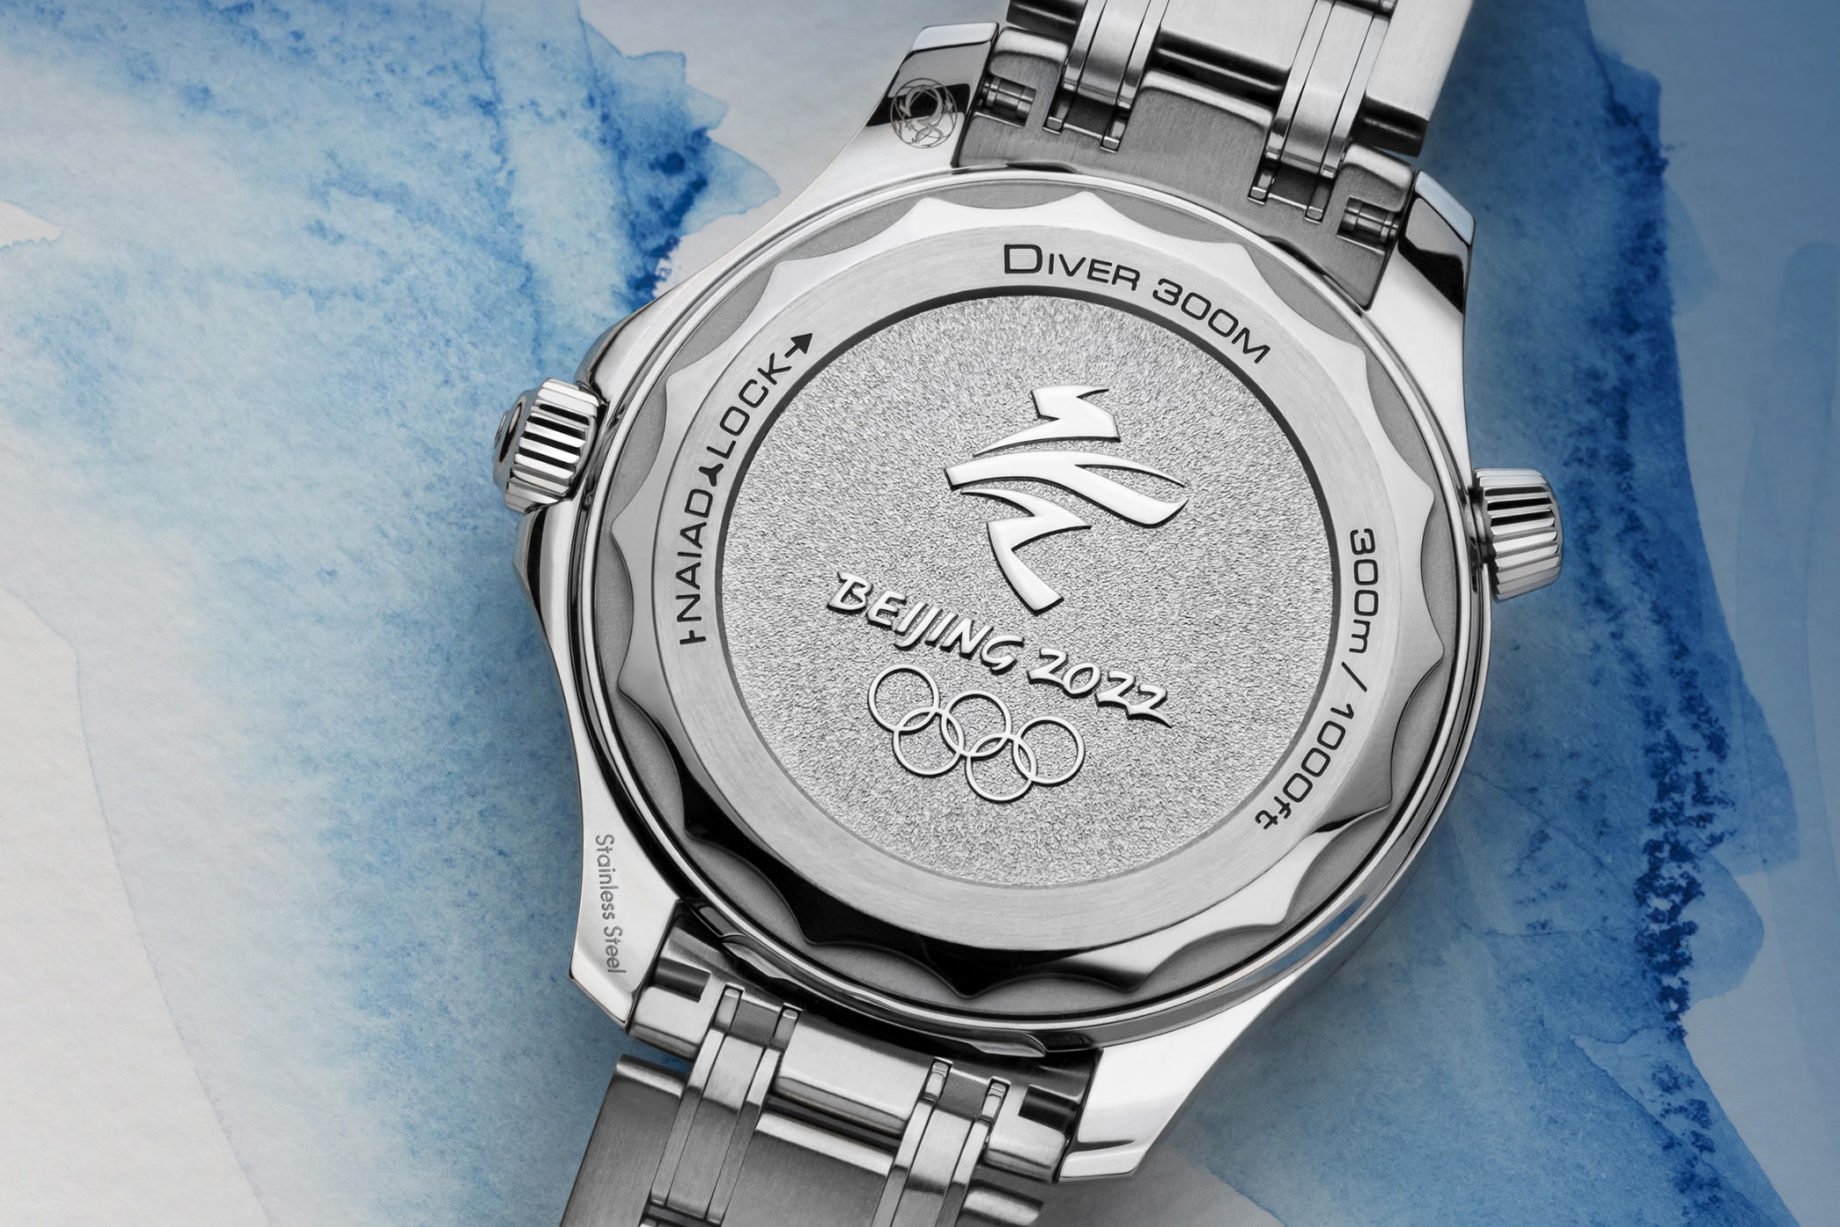 Omega Seamaster Diver 300M "Beijing 2022" Special Edition